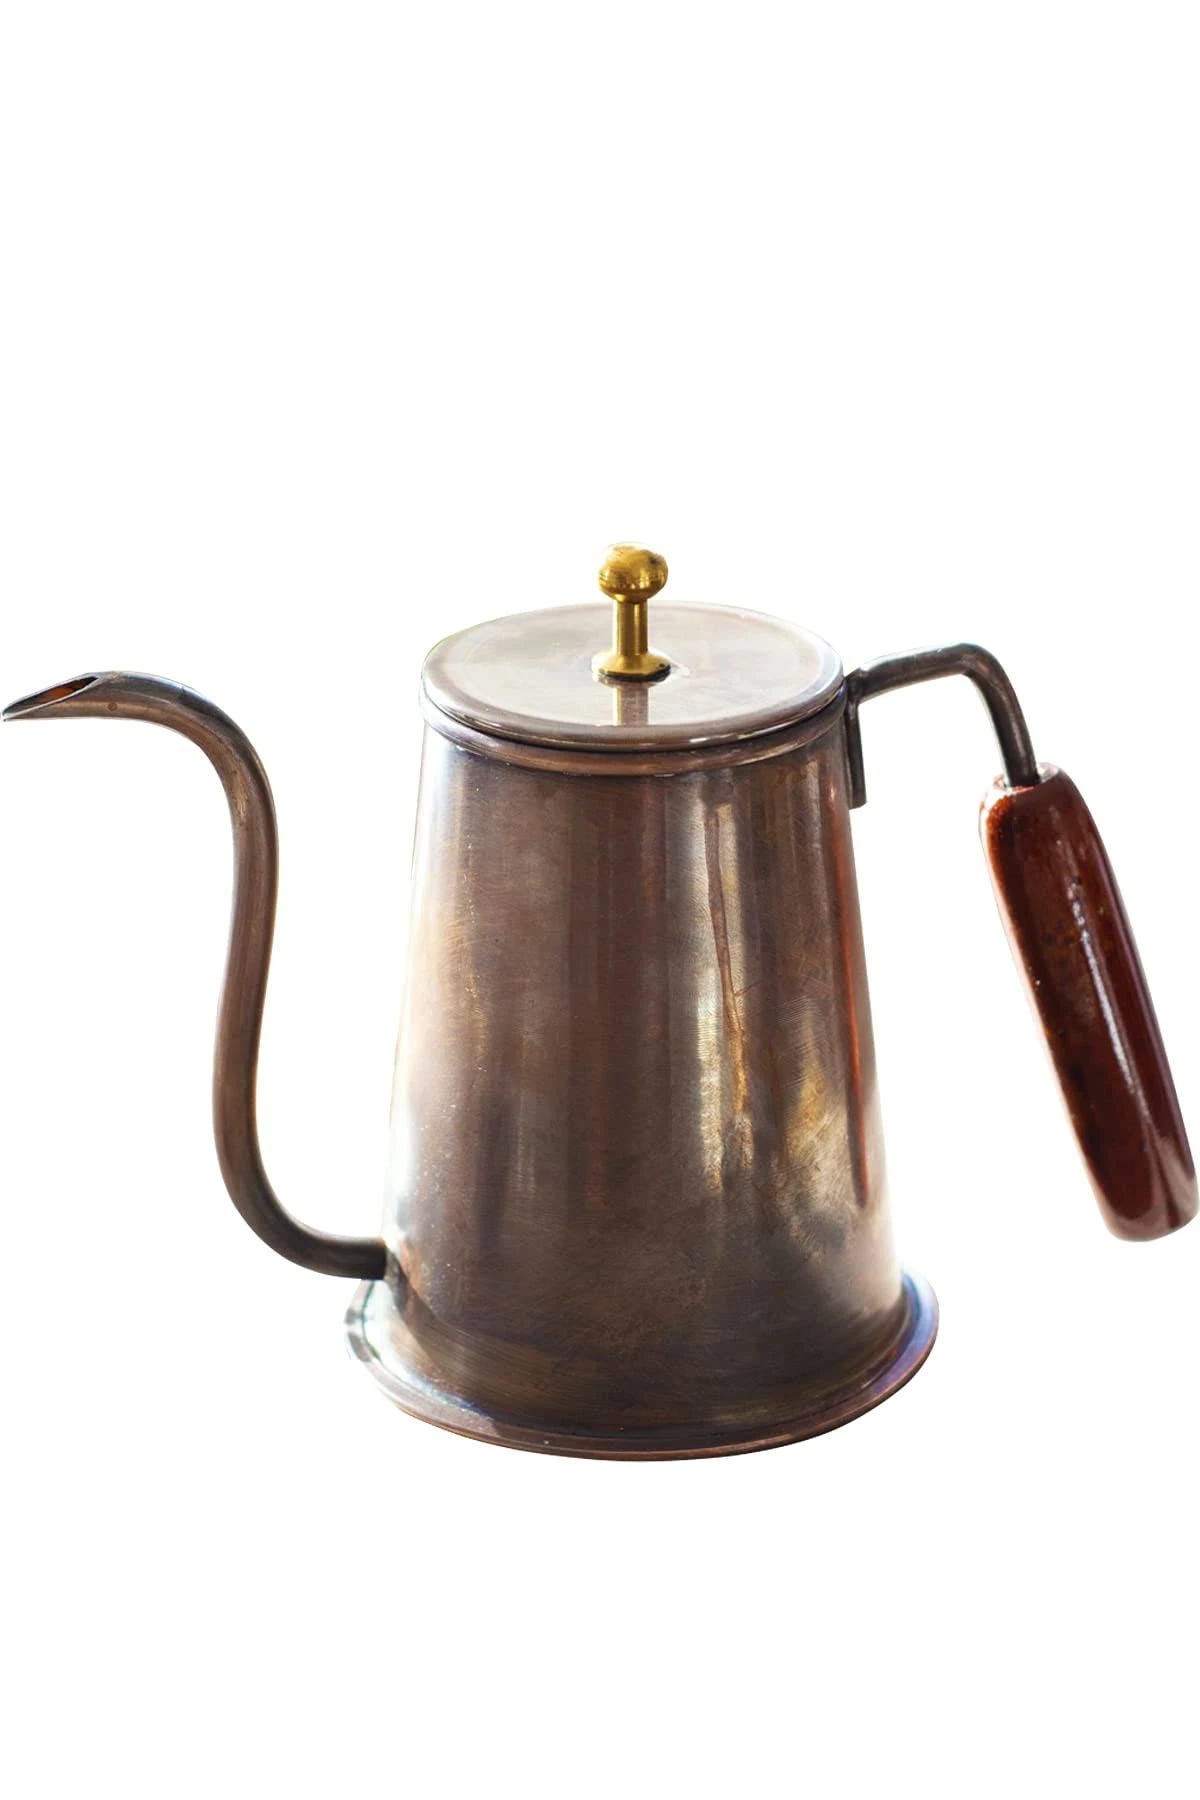 Handmade Copper Tea Kettle with Oxidized Finish | Image